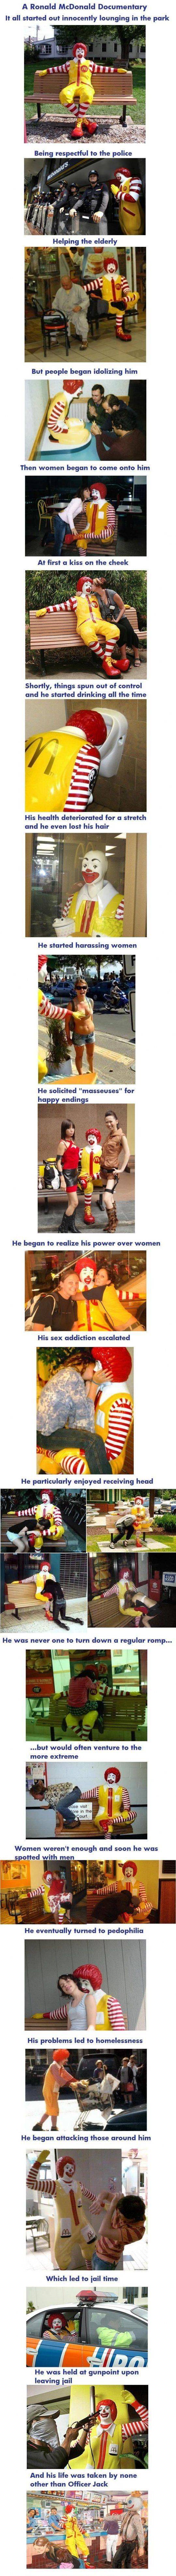 The story of the very well known clown, Ronald McDonald